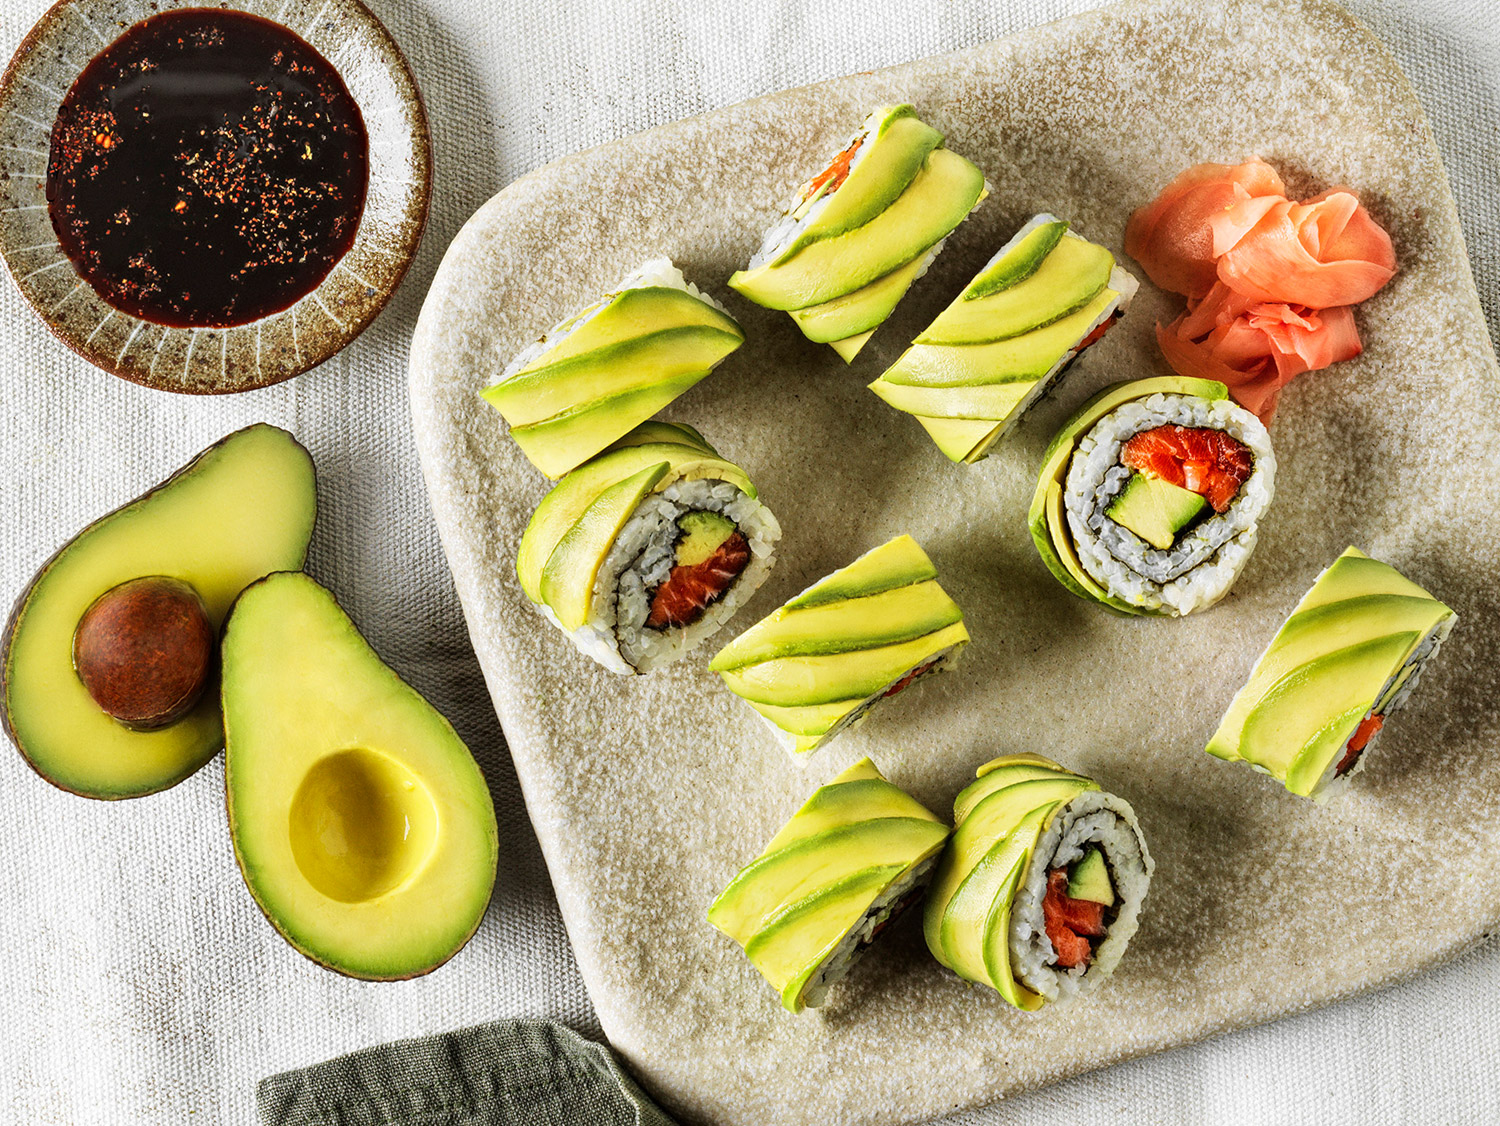 Avocado and salmon inside out sushi rolls - Australian Avocados